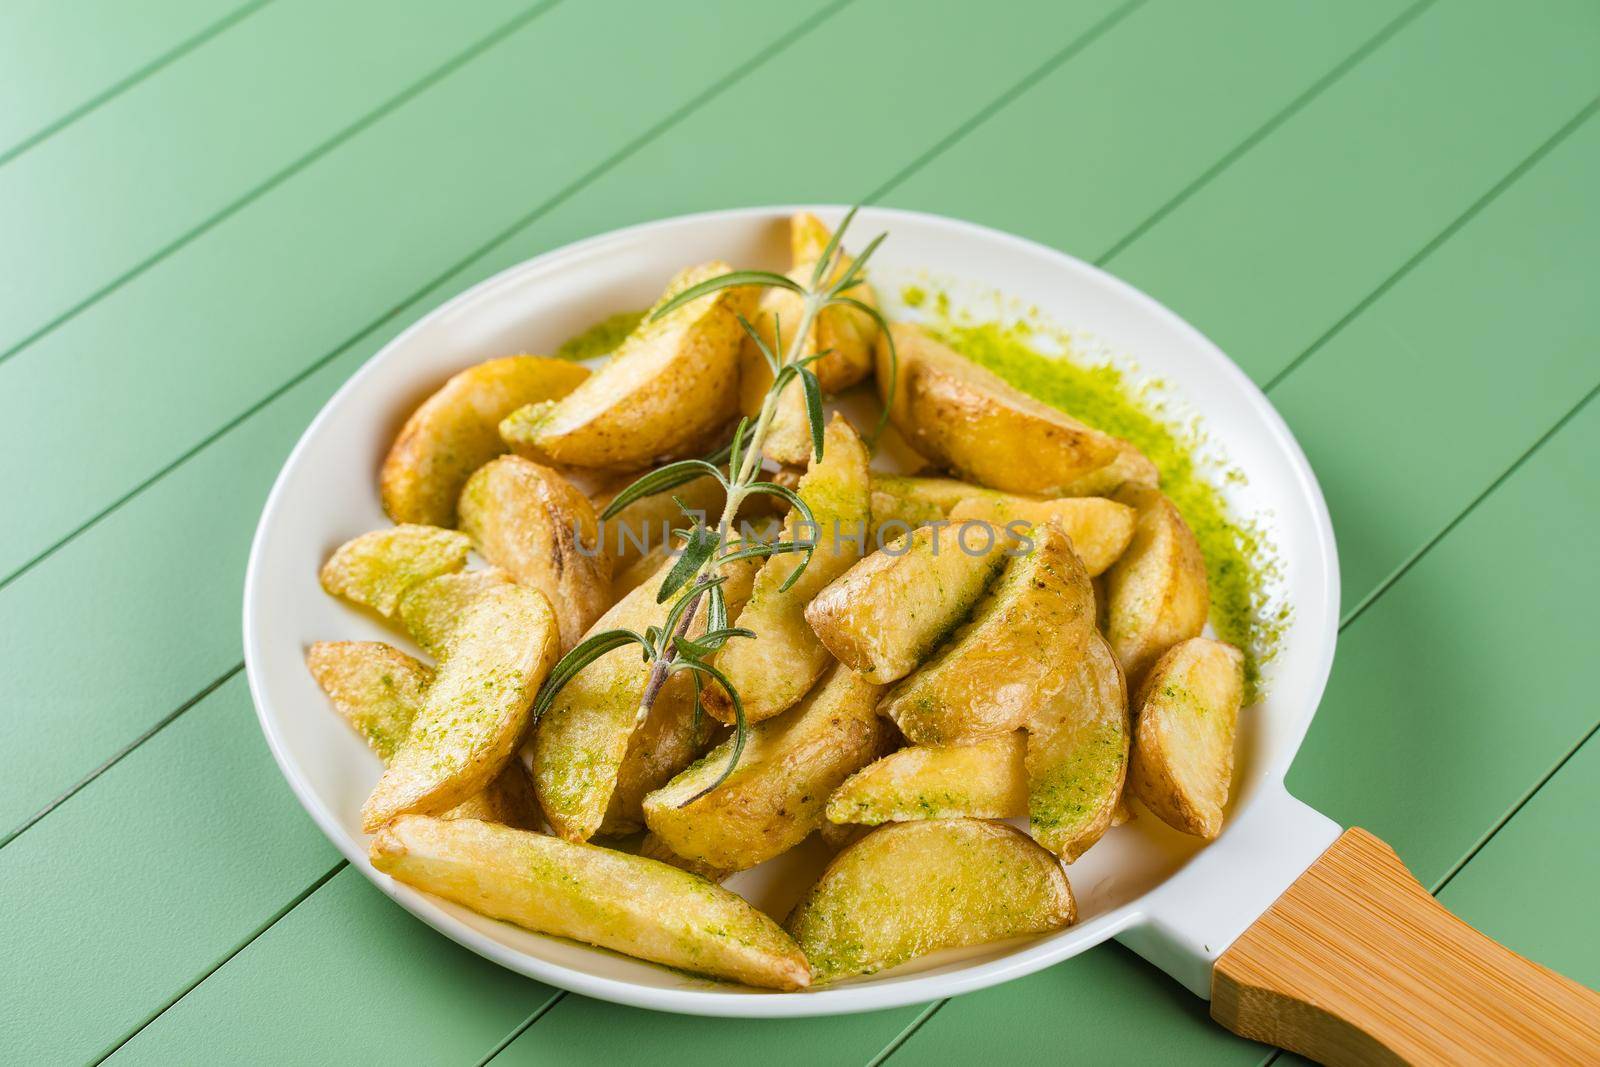 Baked potatoes with green sauce and rosemary on a white plate in the form of a frying pan. Fried potatoes with pesto sauce on a green table.